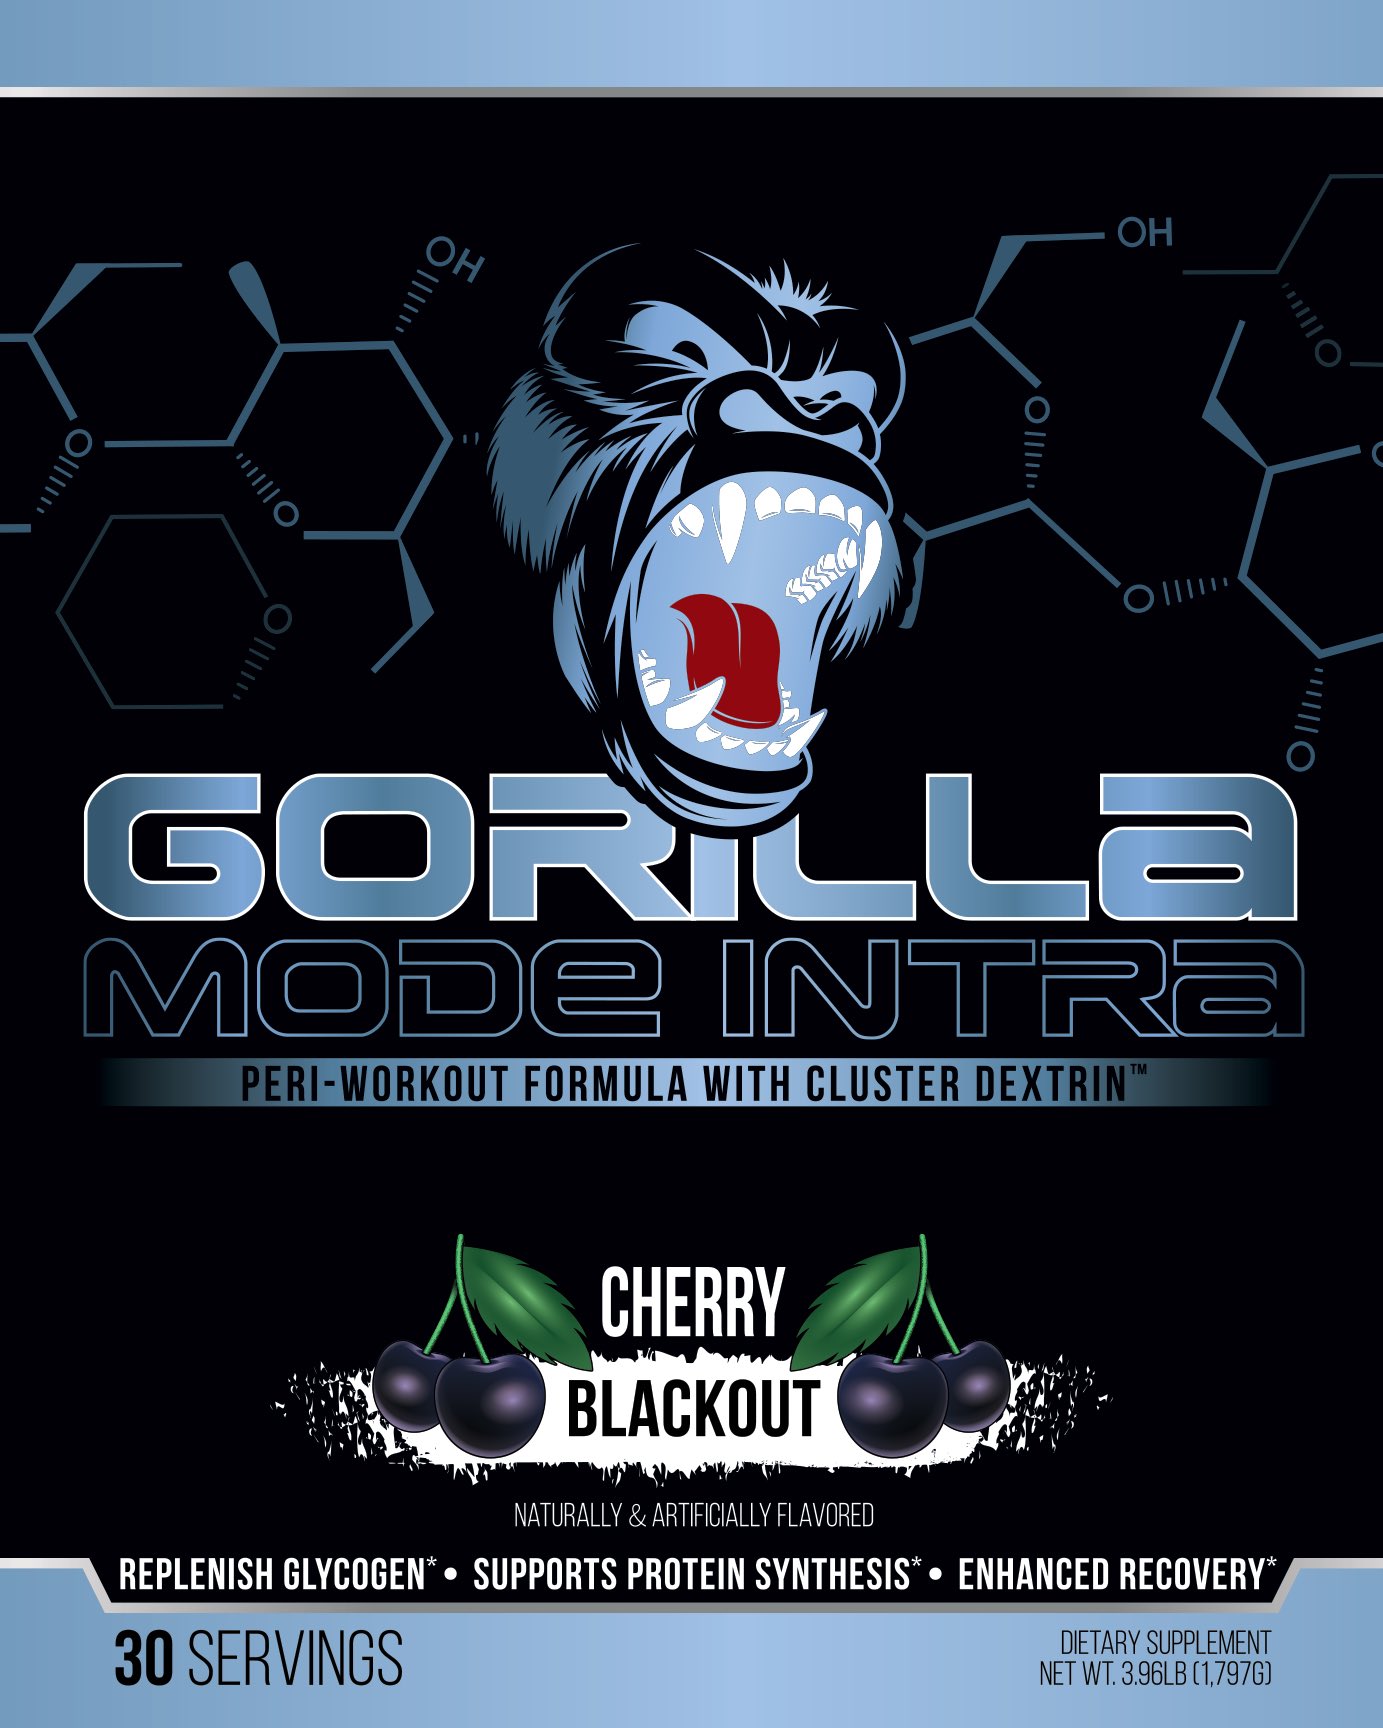 Gorilla Mind on X: Revamped, reformulated, and restocking on Monday.  Formerly 'Gorilla Mode Post-Workout', now returning as 'Gorilla Mode Intra'  - our upgraded peri-workout formula for use pre, intra, or post-workout.  Formula